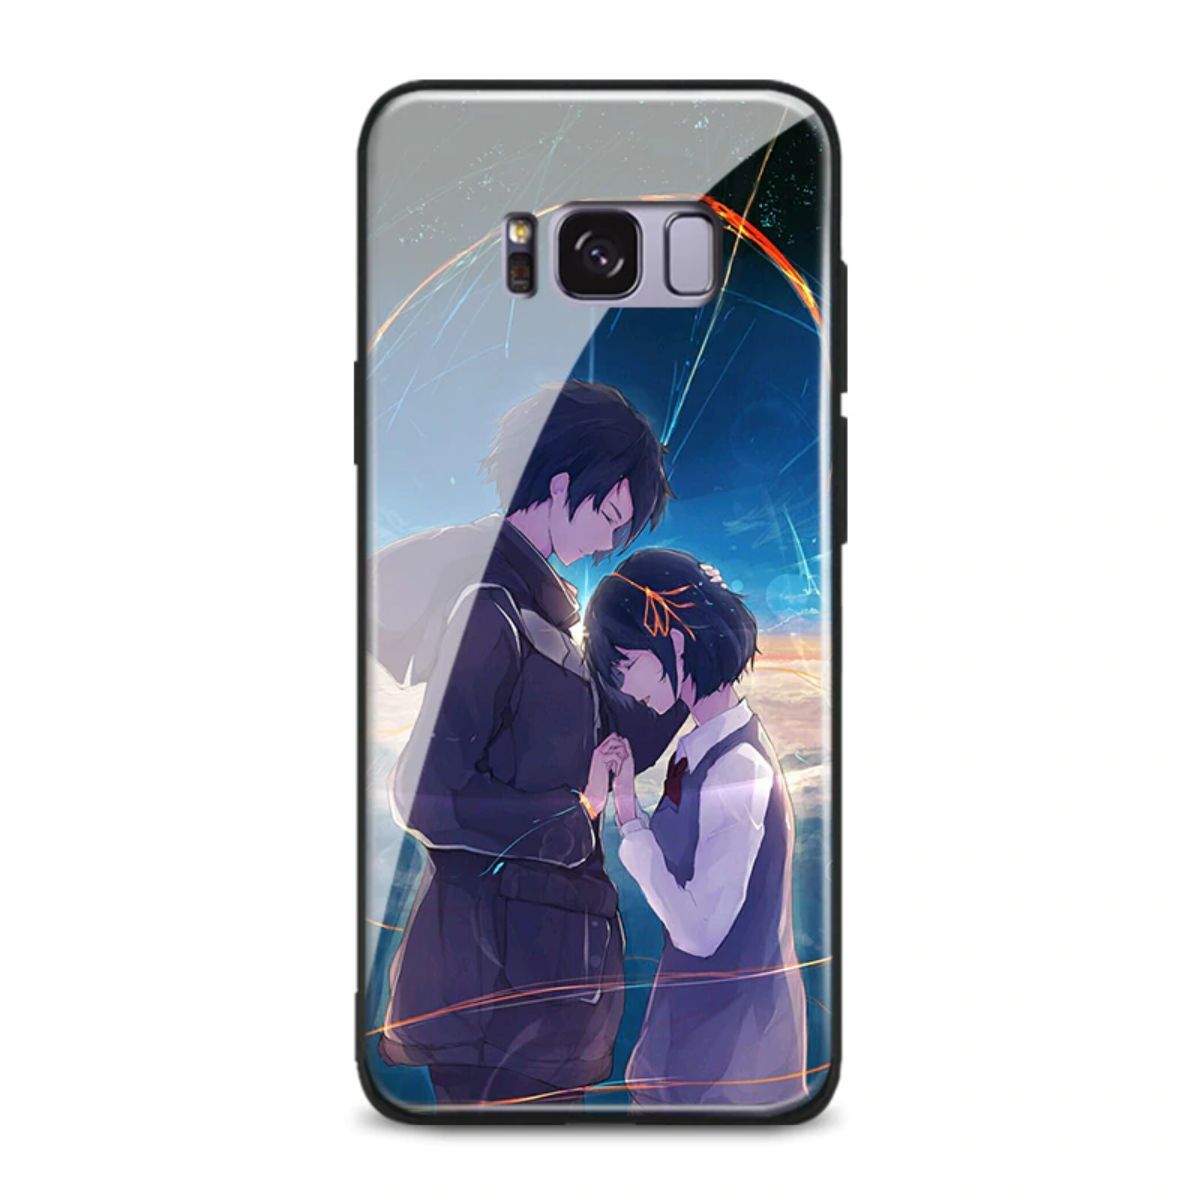 Anime Tempered Glass Case For Samsung Galaxy S8 S9 S10e S10 Note 8 9 10 ...